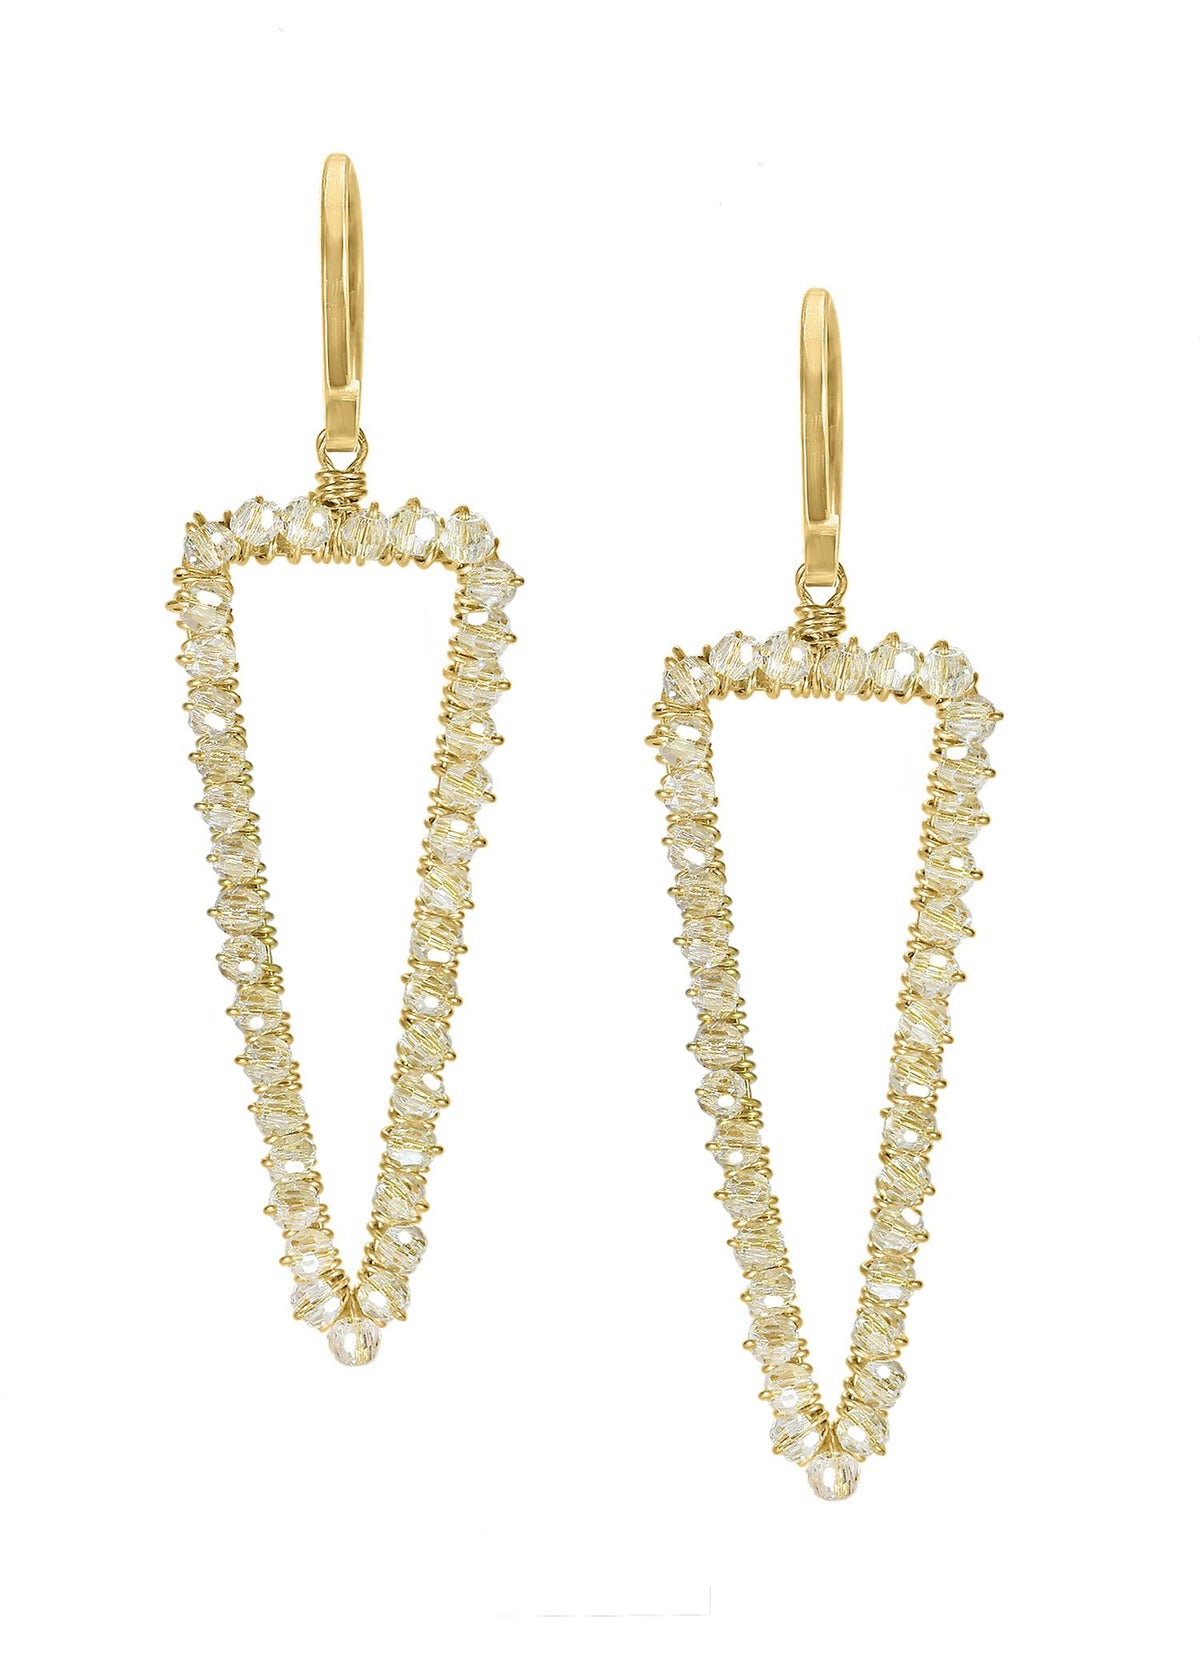 Crystal 14k gold fill Earrings measure 1-3/4&quot; in length (including the ear wires) and 15/16&quot; in width Handmade in our Los Angeles studio